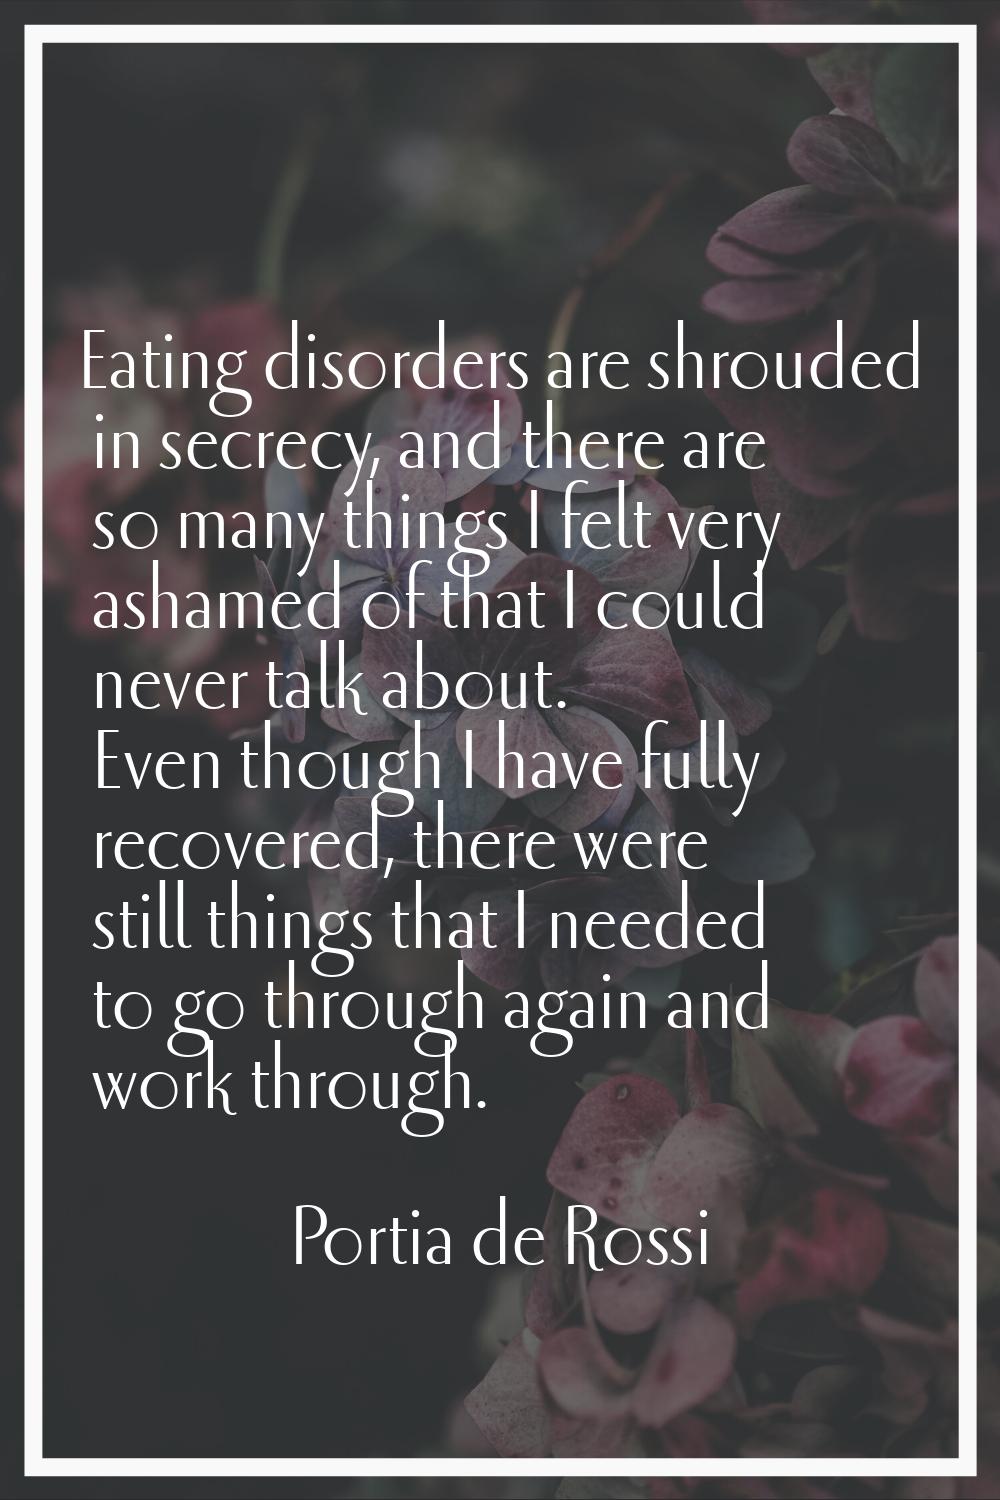 Eating disorders are shrouded in secrecy, and there are so many things I felt very ashamed of that 